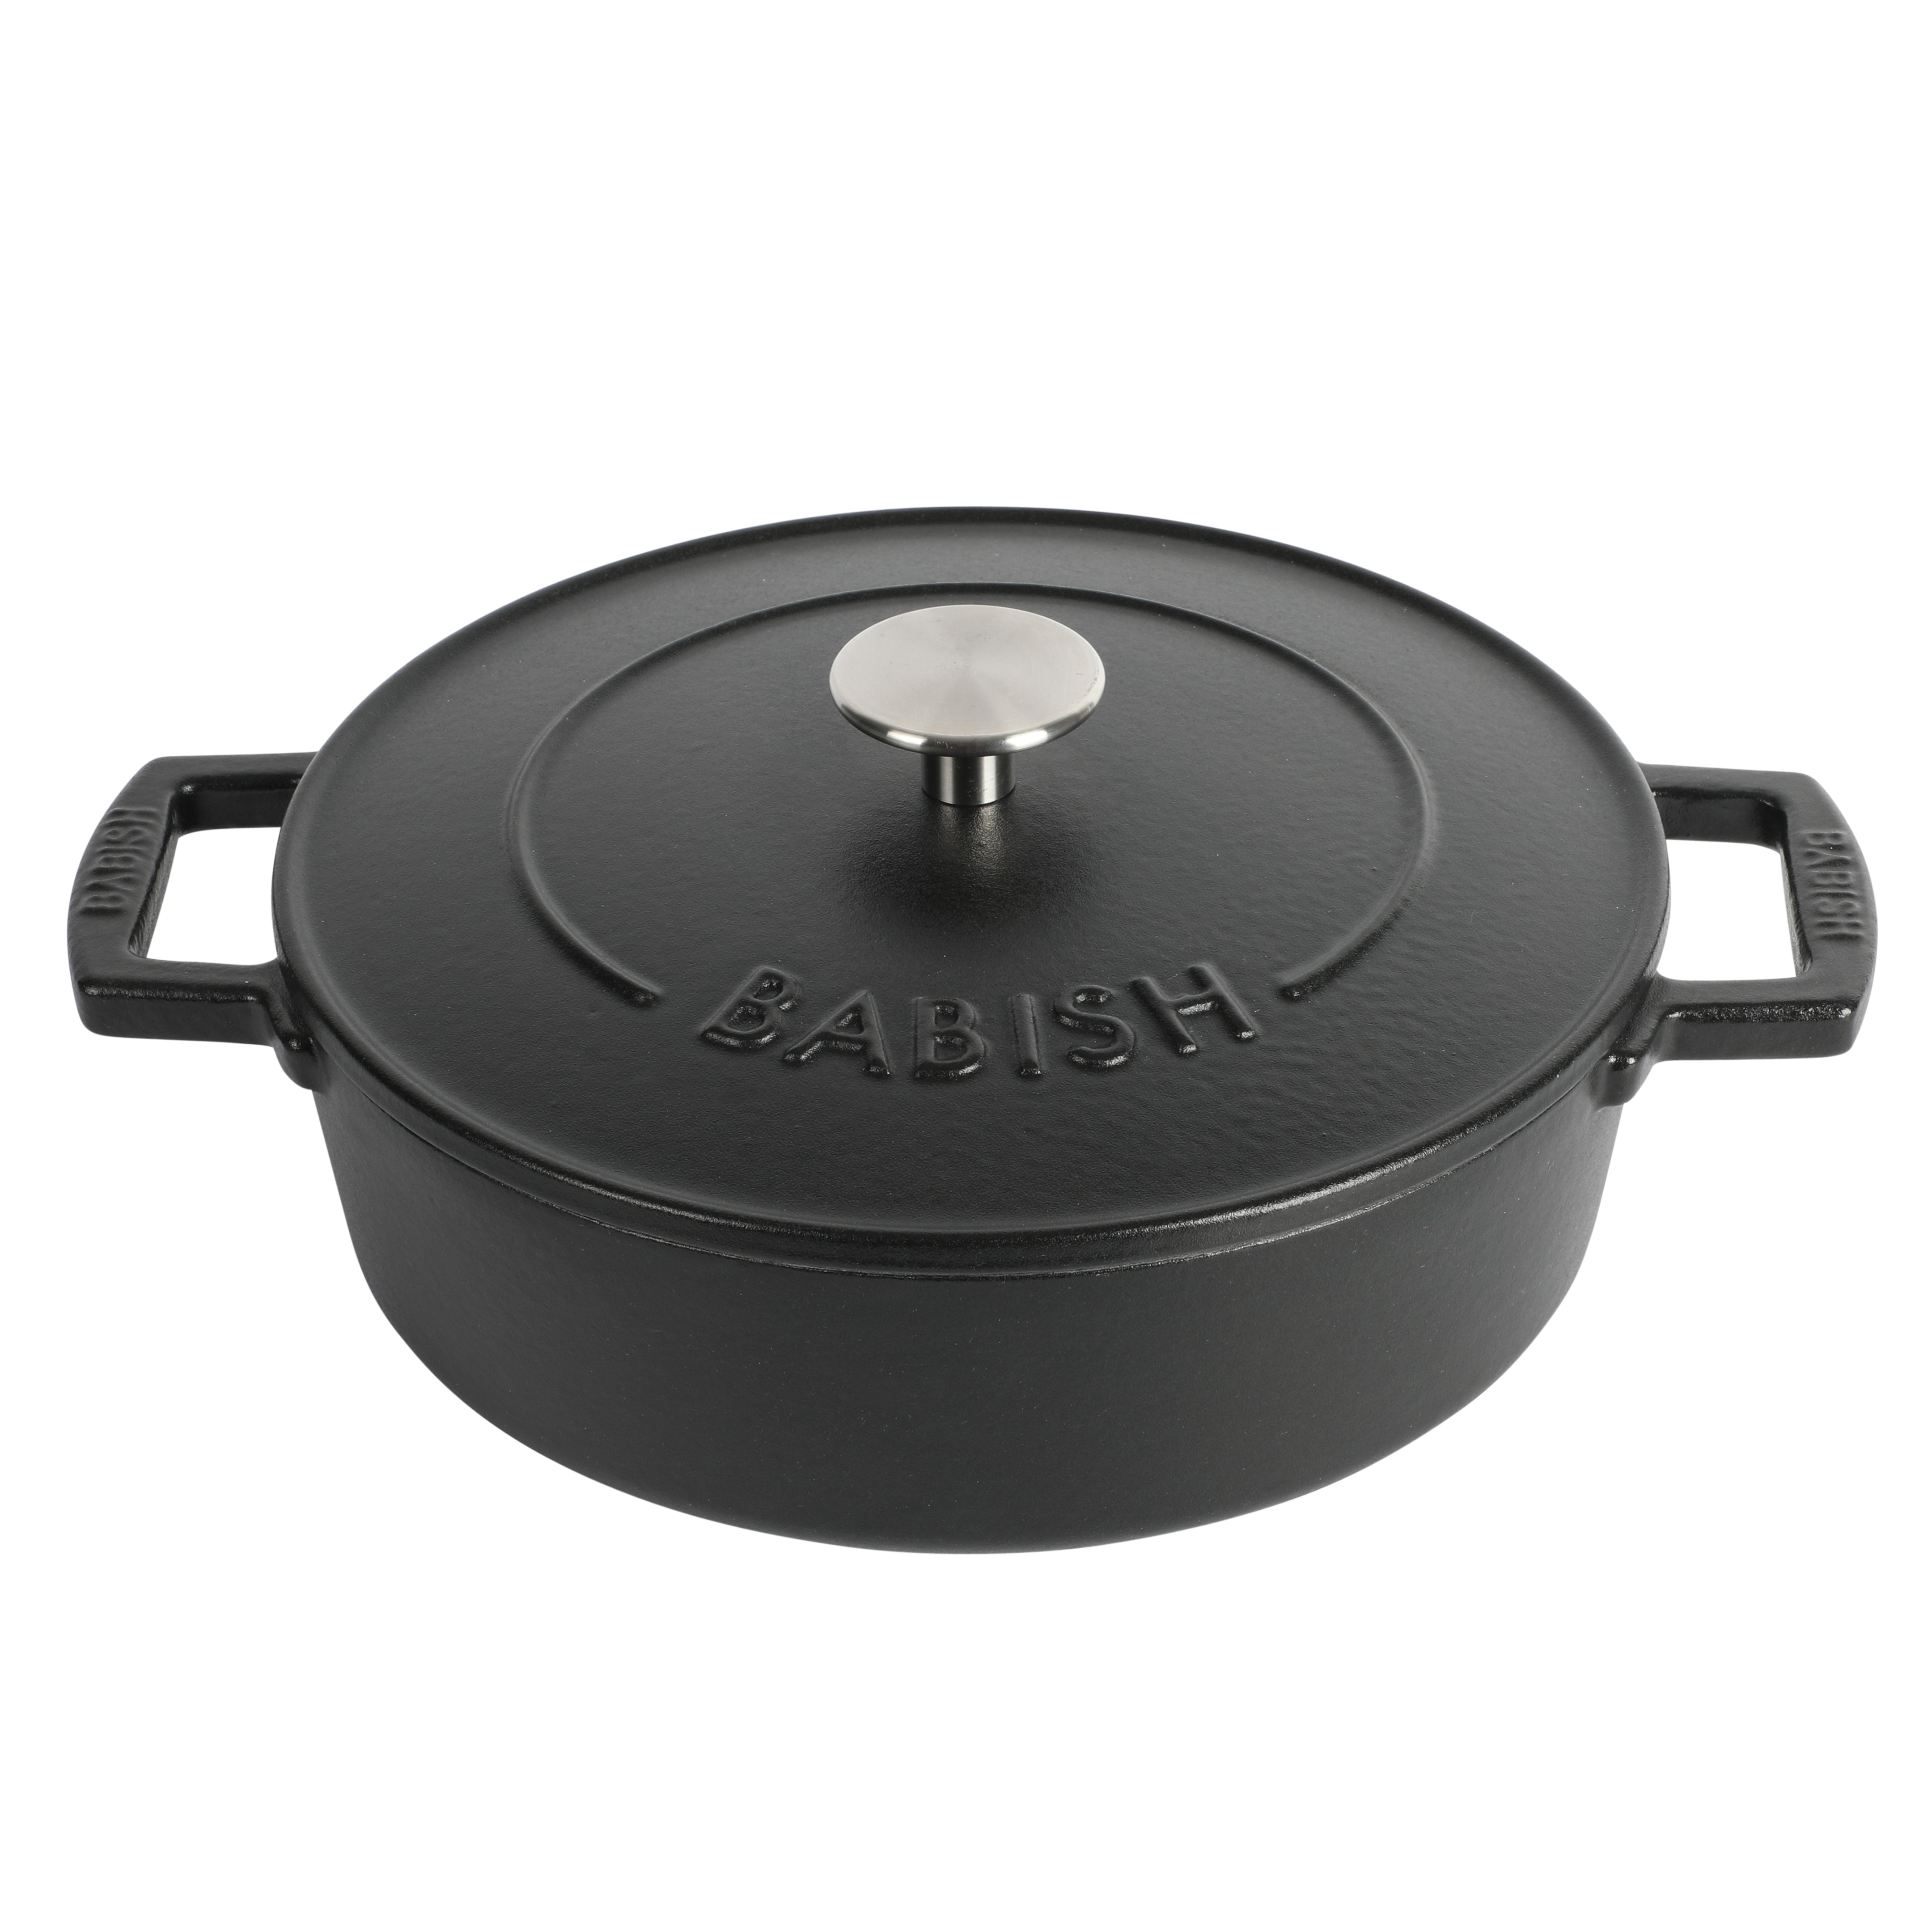 Babish Round Enamel Cast Iron Dutch Oven w/Lid, 6-Quart, Matte Black &  2-Piece (5” and 7”) Stainless Steel Tiny Whisk Set